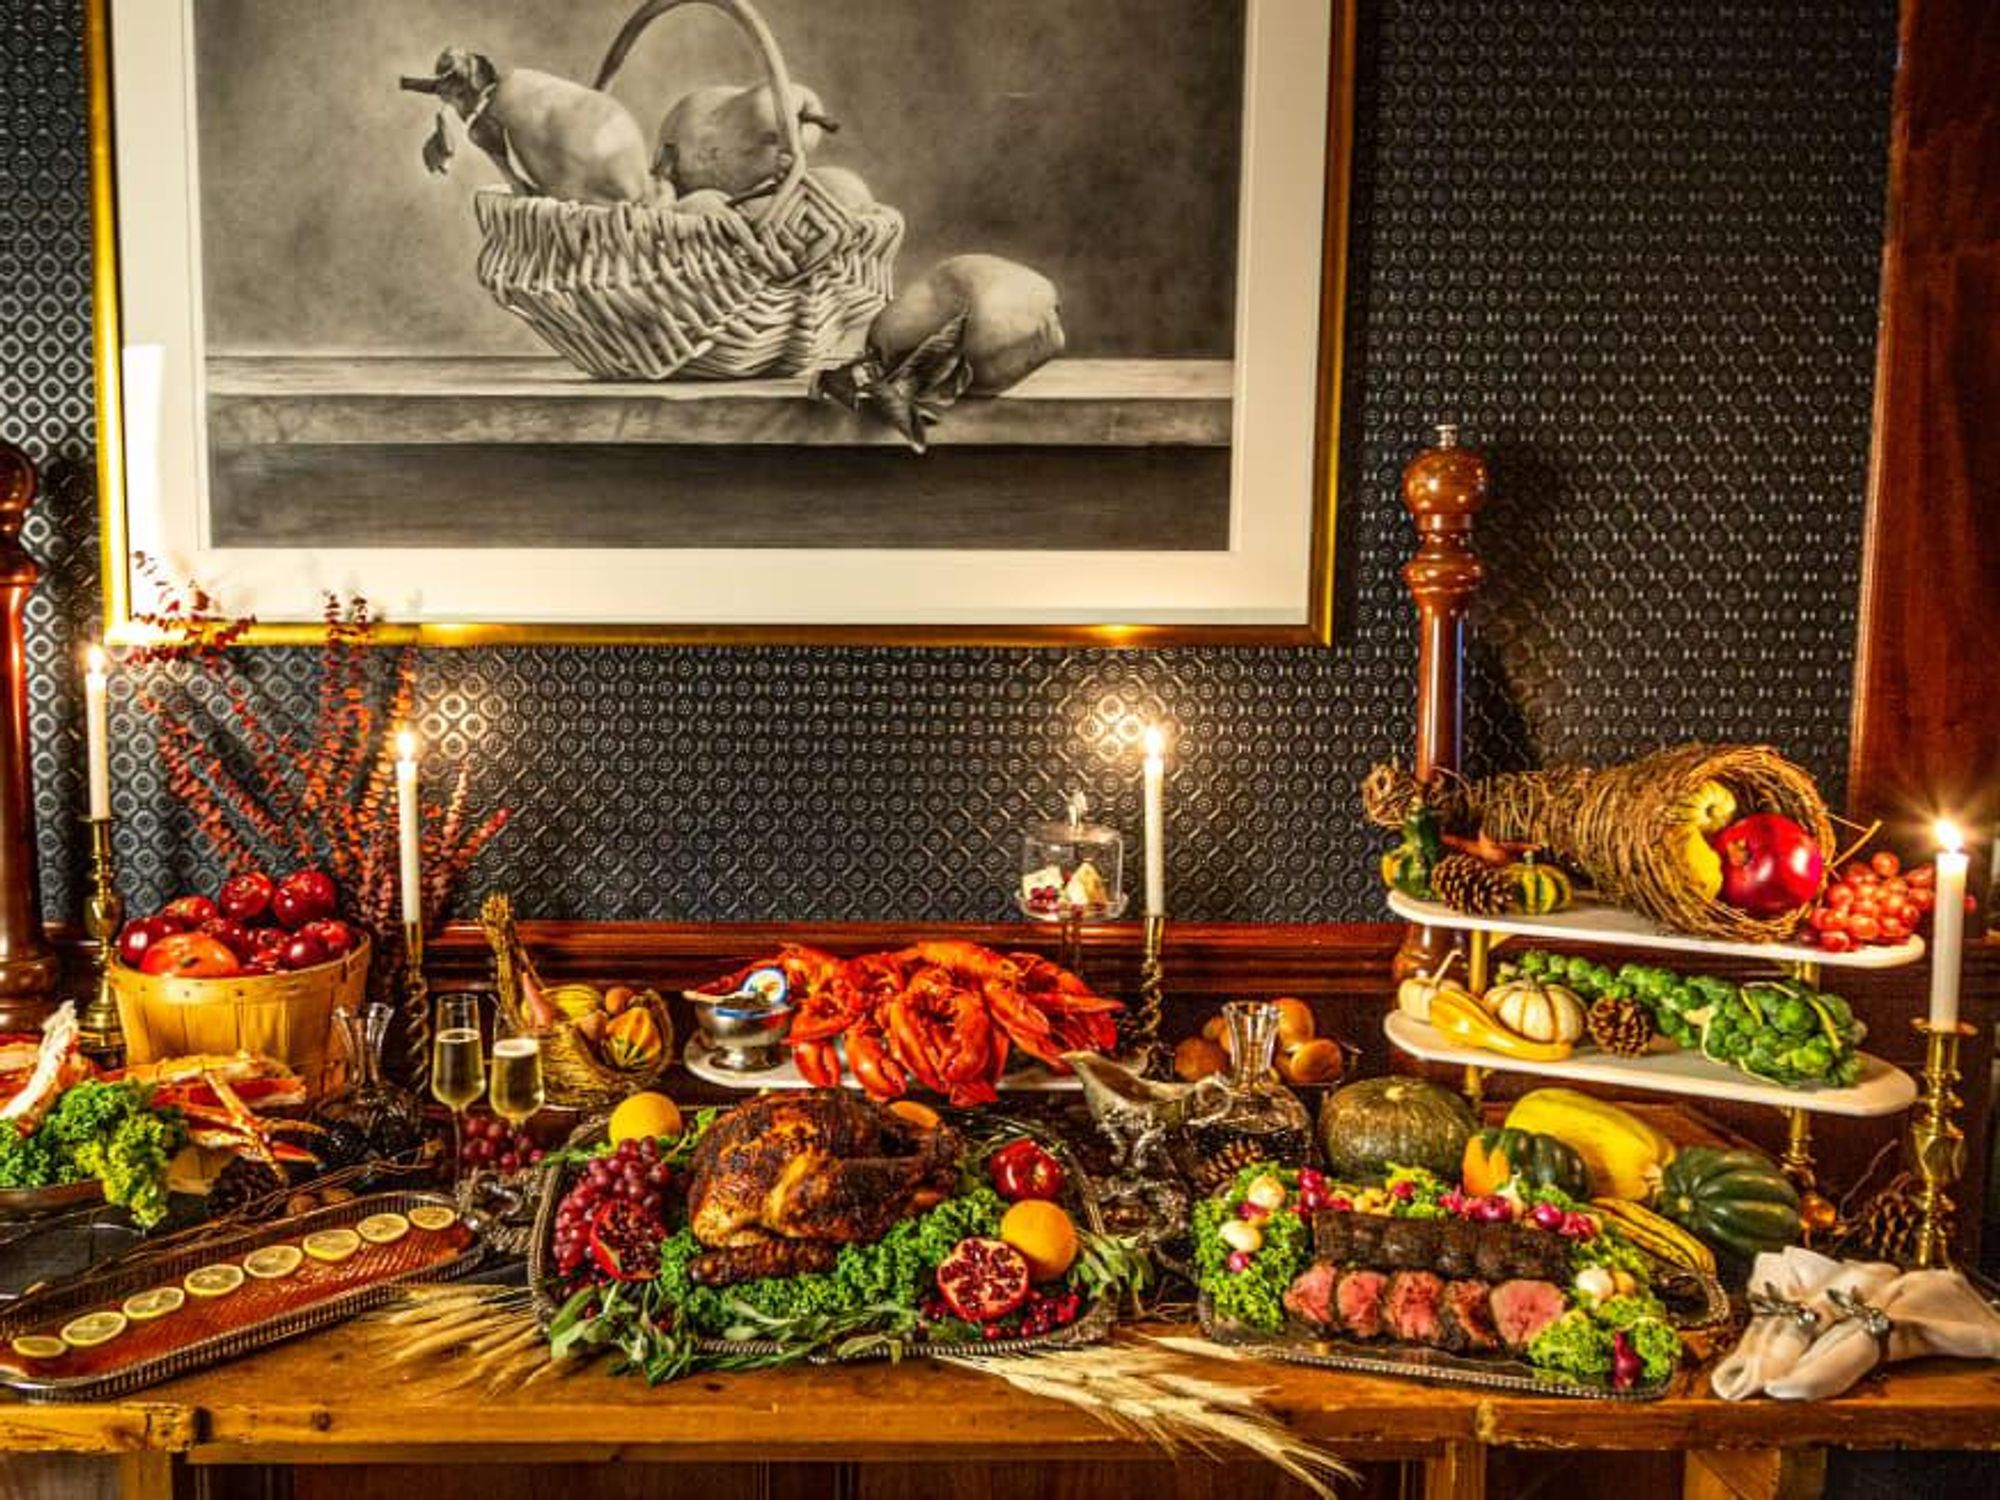 Dine In or Take Out: The Best Restaurants Open for Thanksgiving